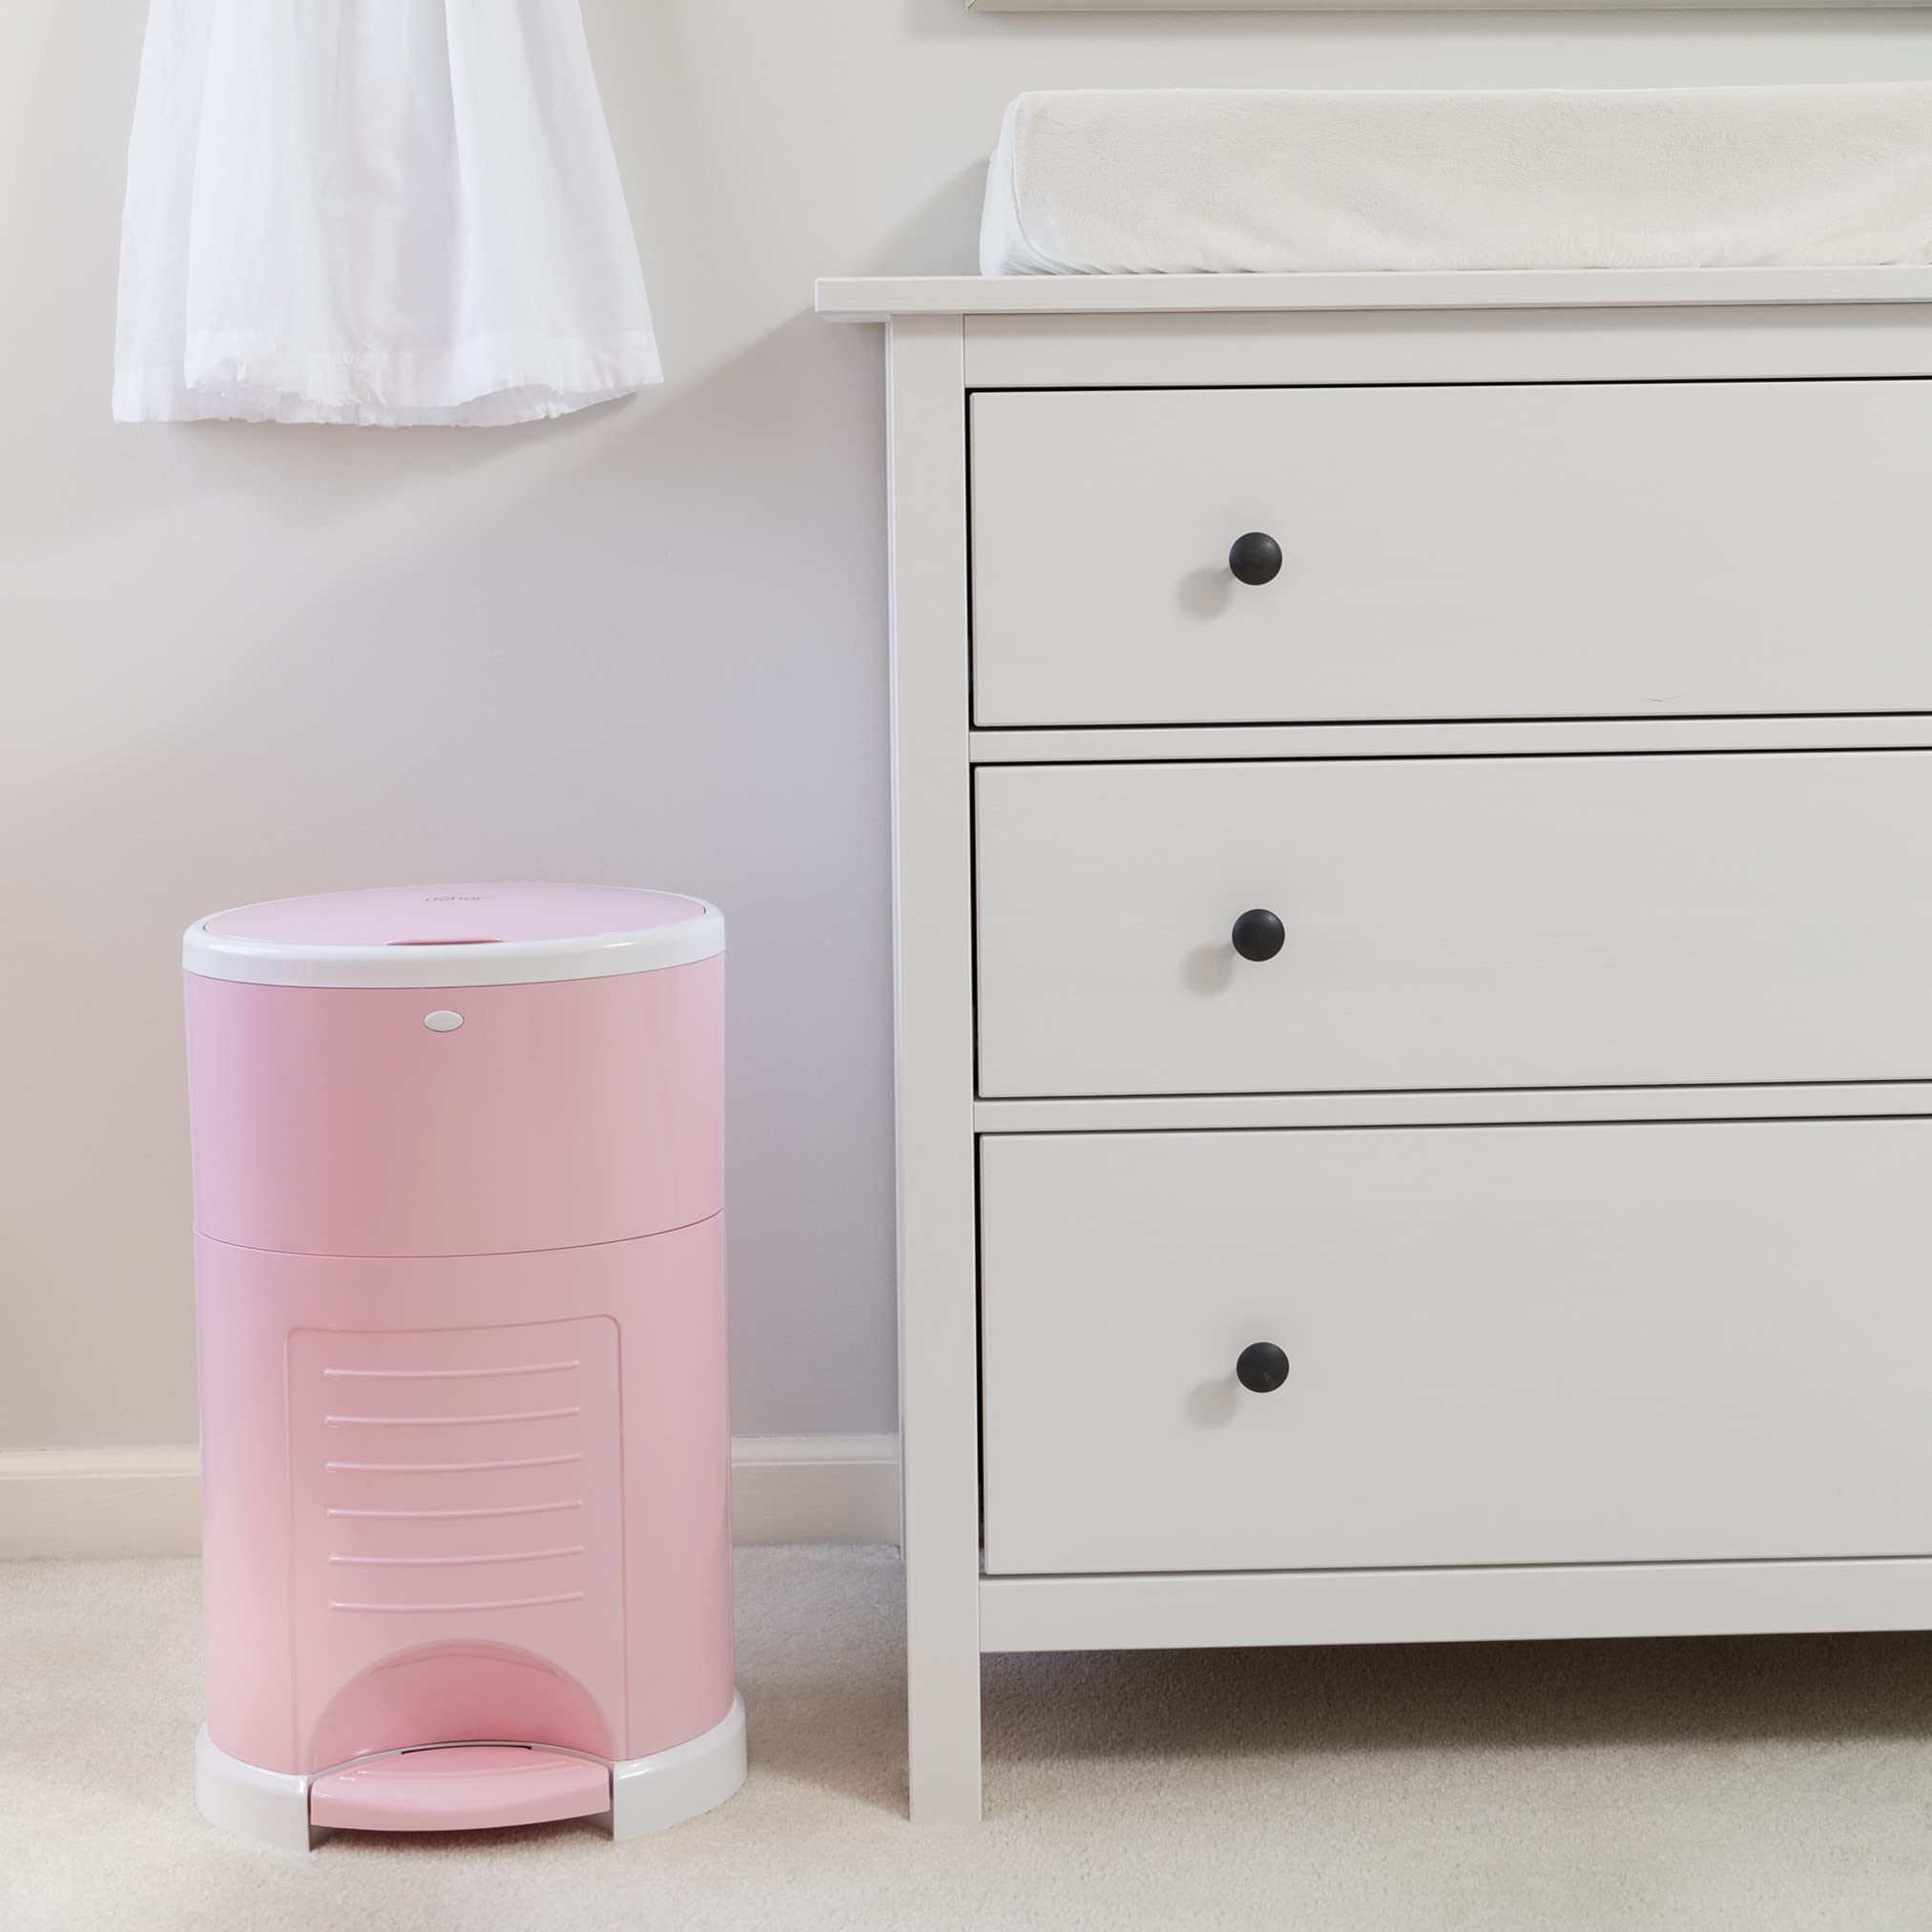 Dekor Plus Hands-Free Diaper Pail | Soft Pink | Easiest to Use | Just Step – Drop – Done | Doesn’t Absorb Odors | 20 Second Bag Change | Most Economical Refill System |Great for Cloth Diapers